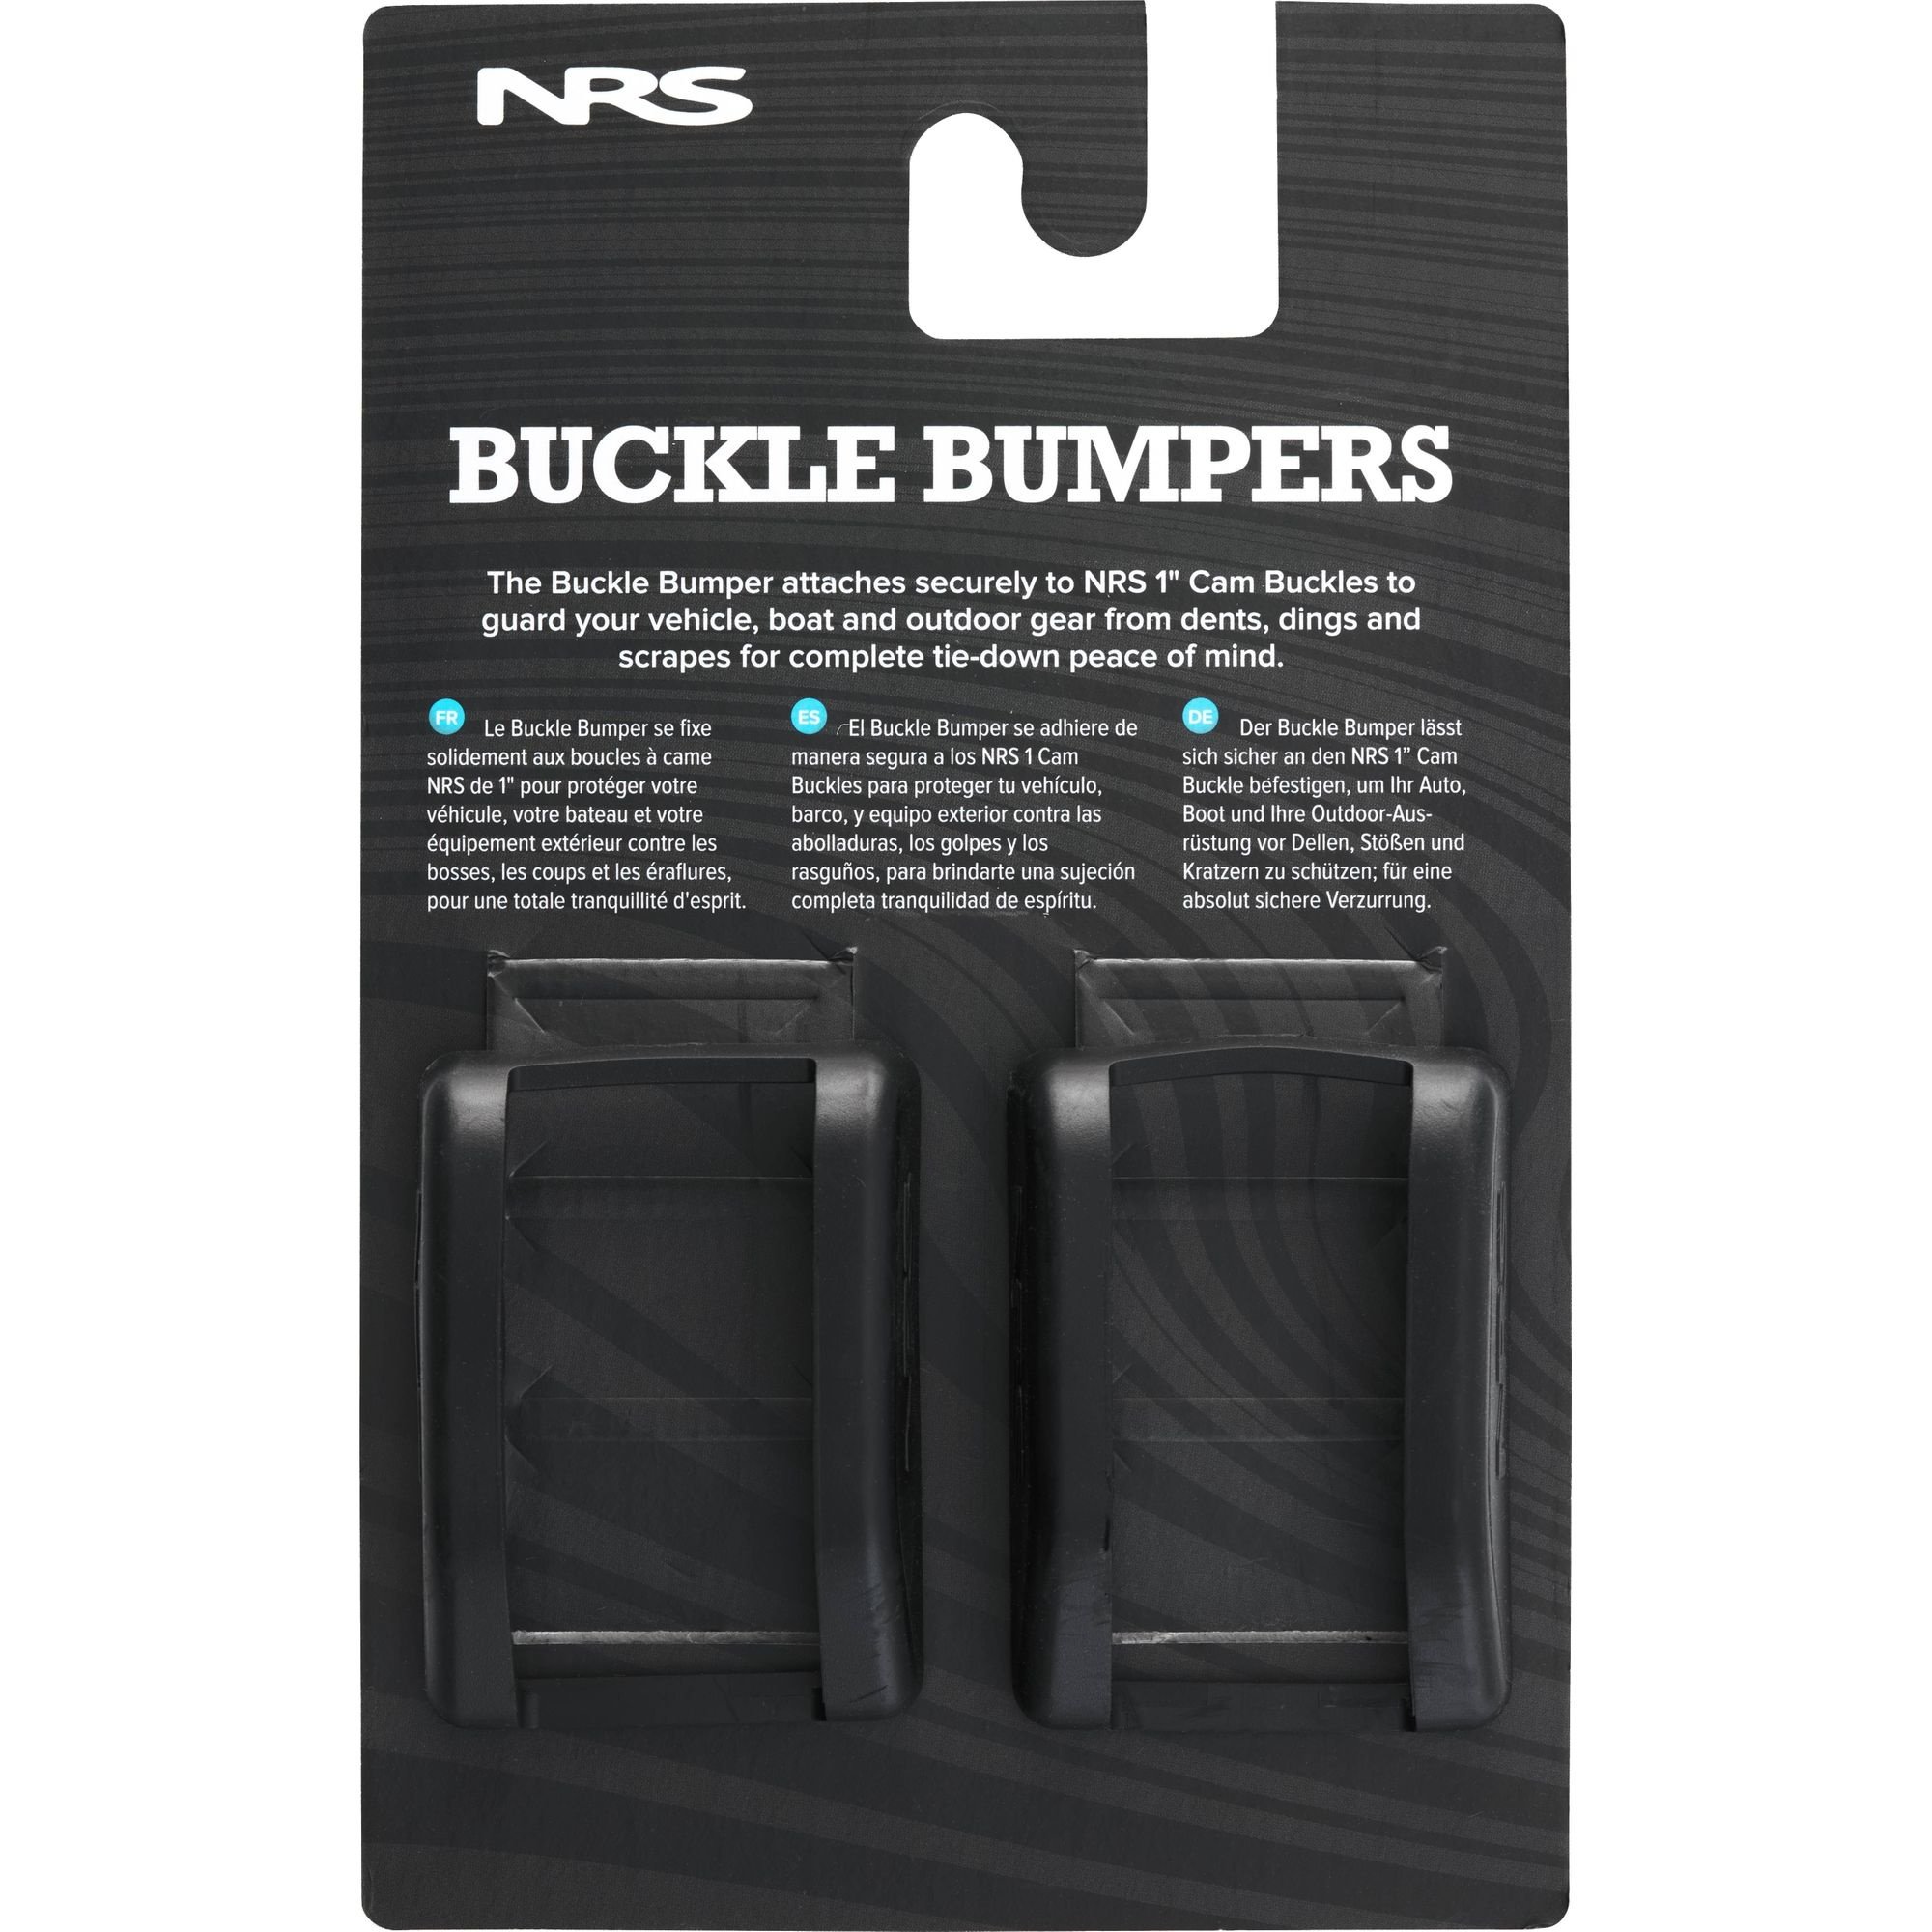 NRS NRS Buckle Bumpers for 1" Cam Straps